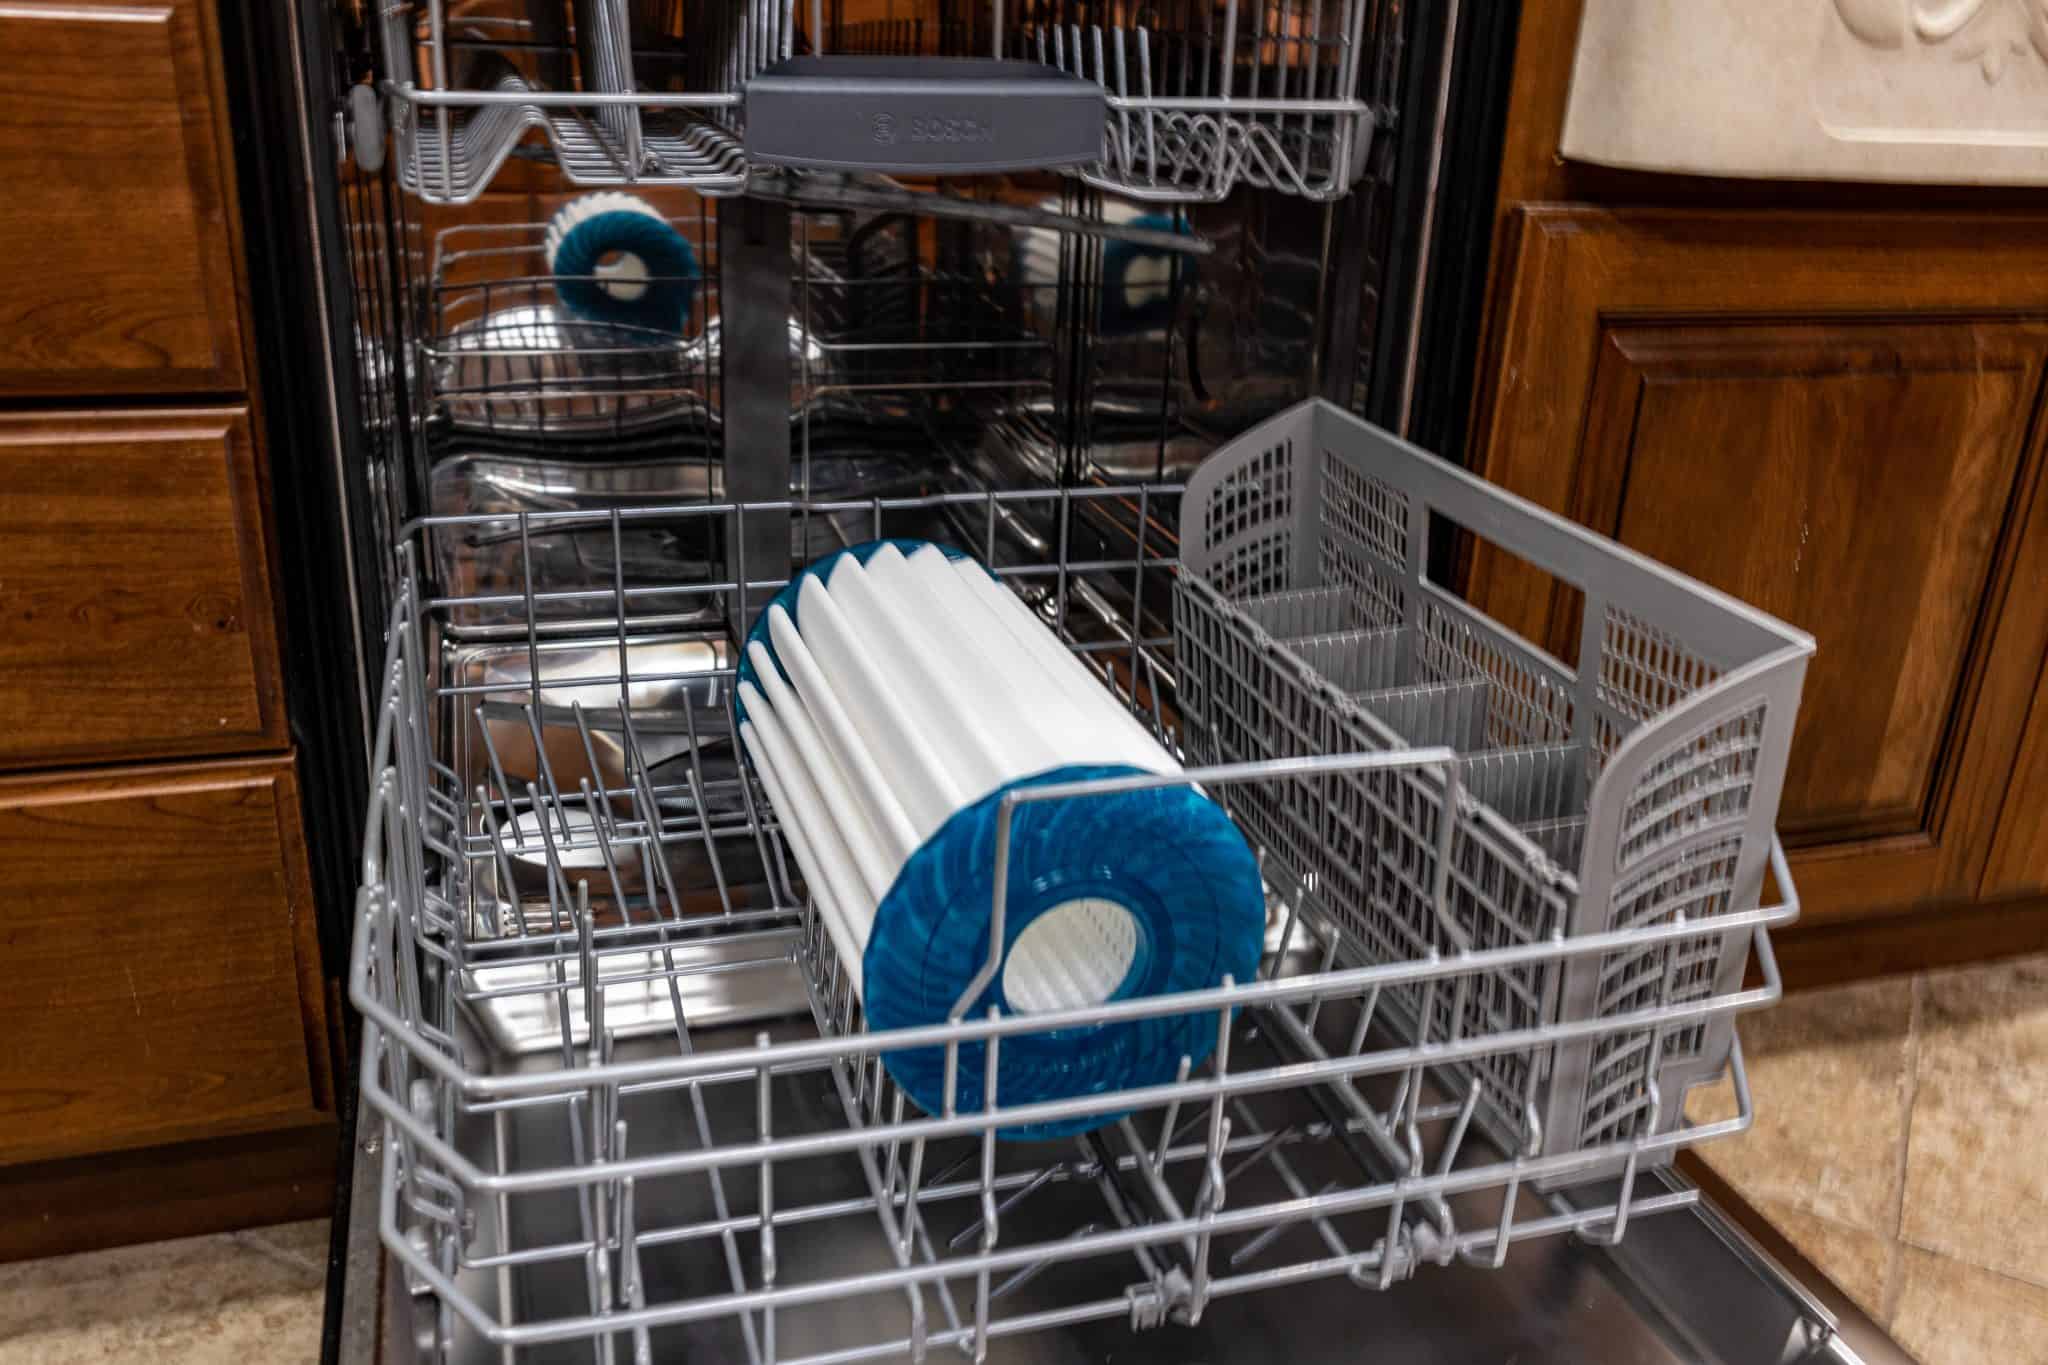 How to Clean Tri-X Filters in a dish washer - All About Spas